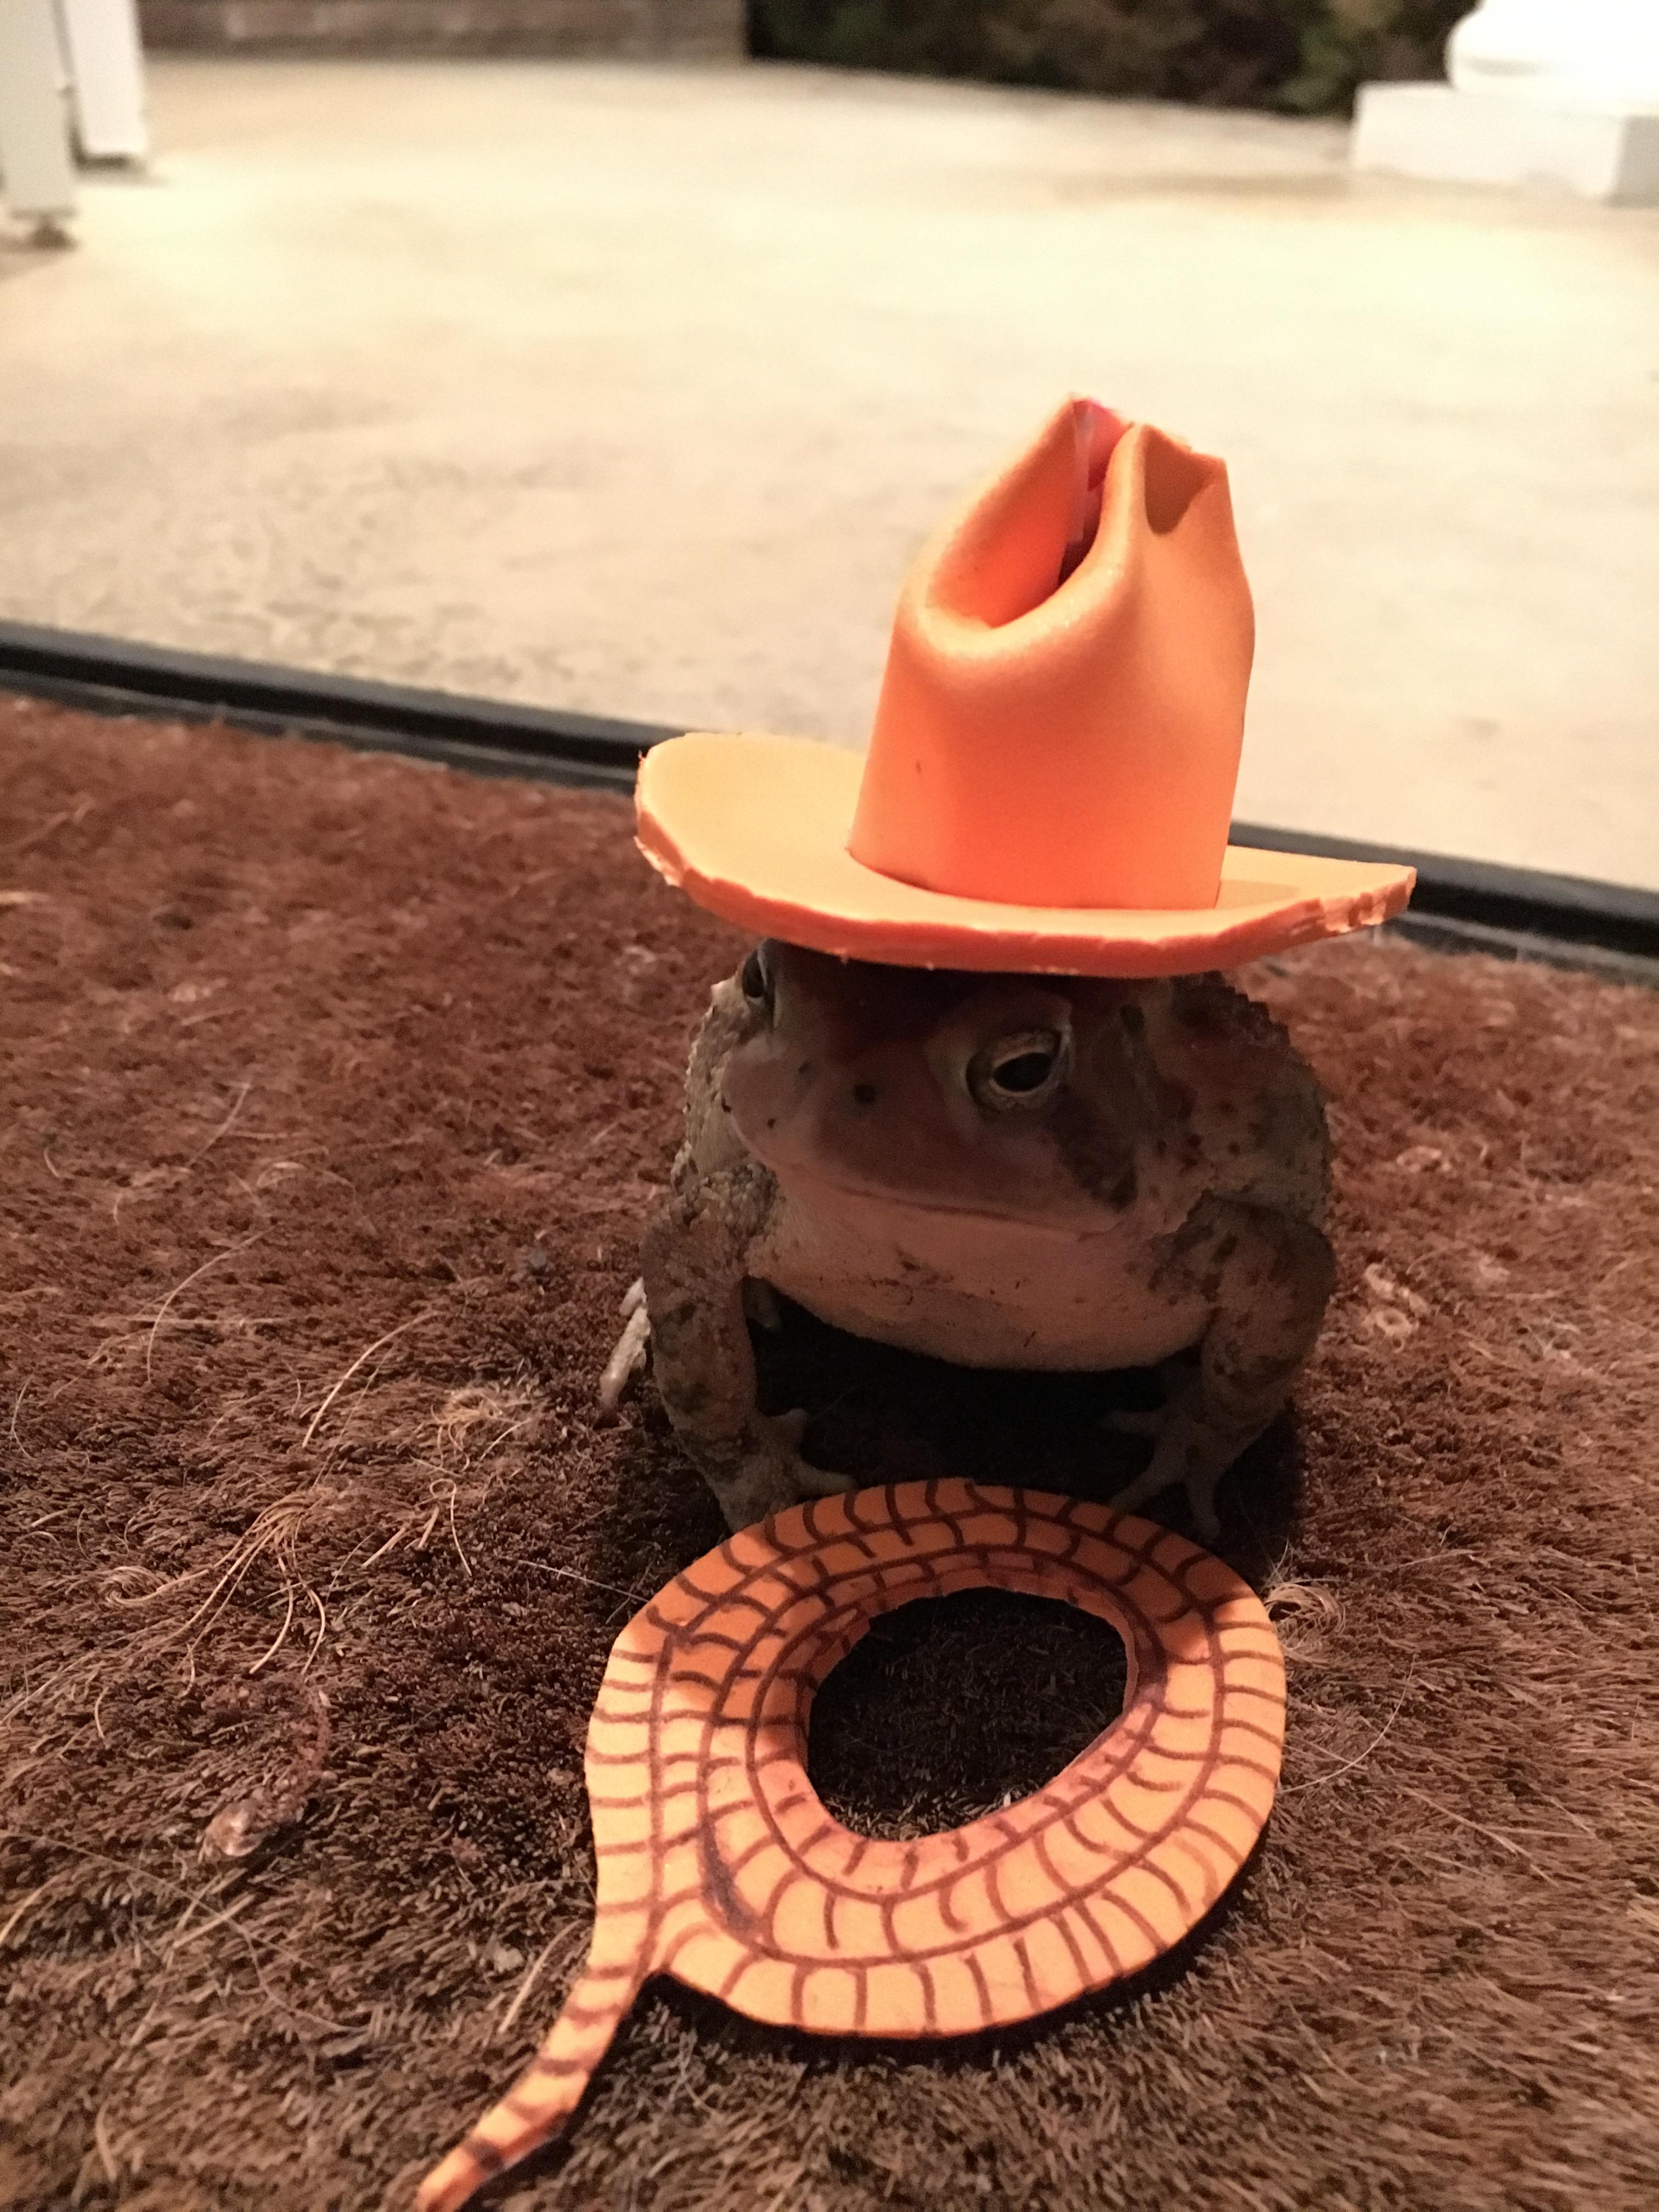 Man makes cute hats for toad that visits his porch 6